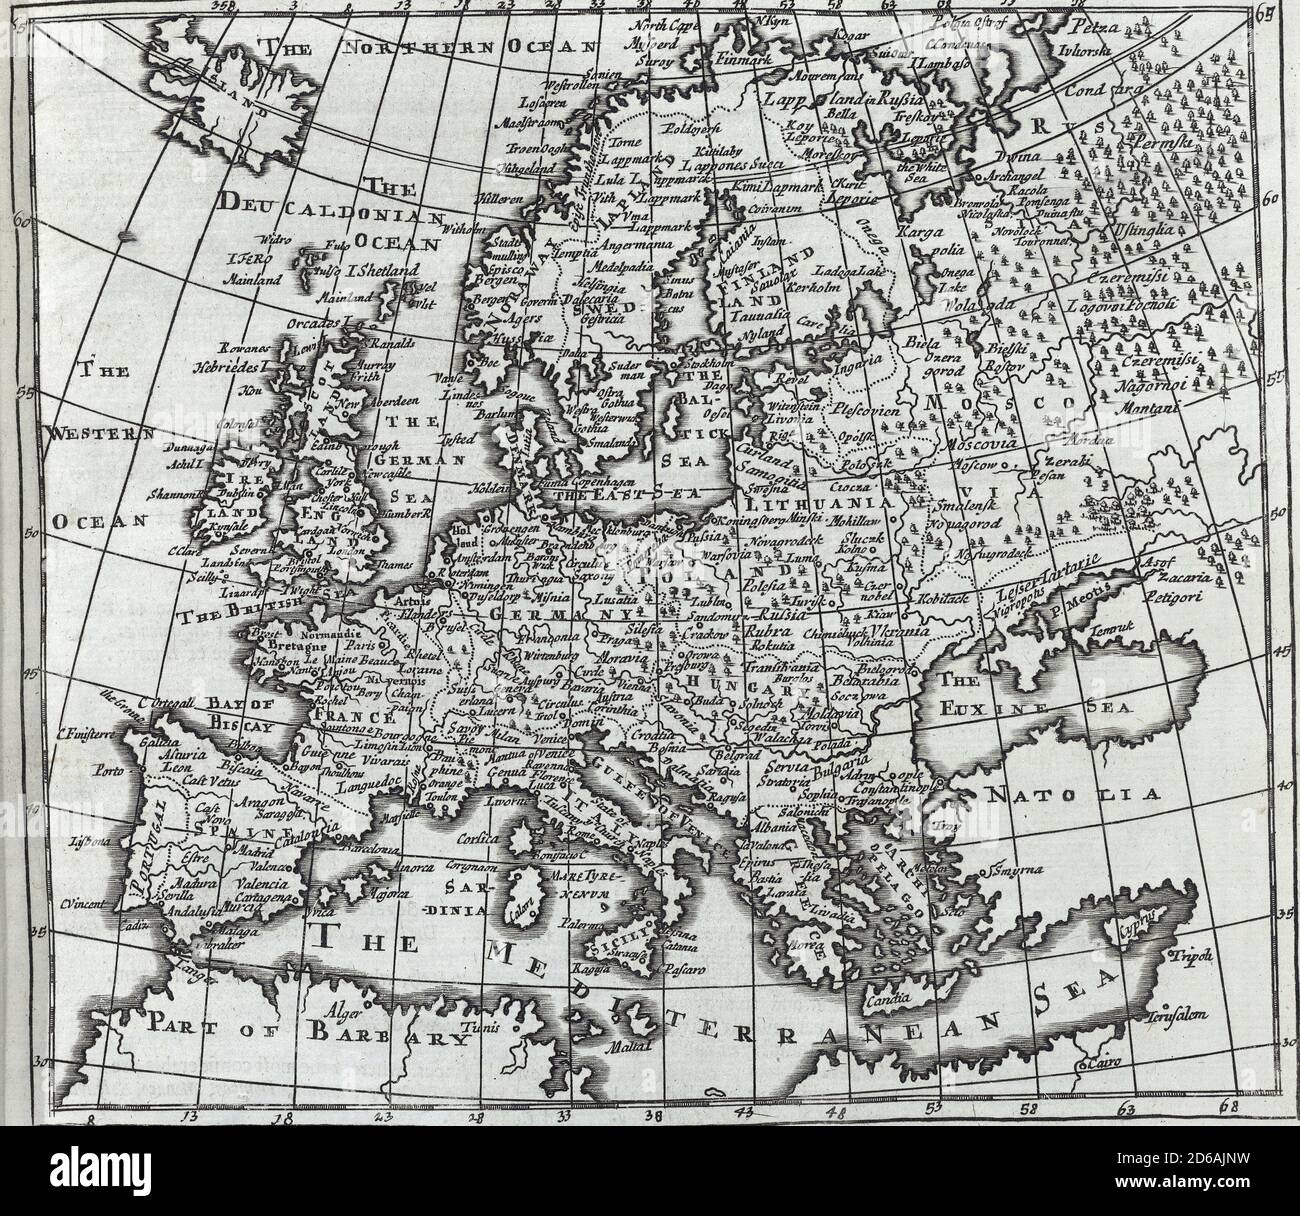 Antique map of Europe Modified from the map released under Creative Commons license from the The New York Public Library Stock Photo